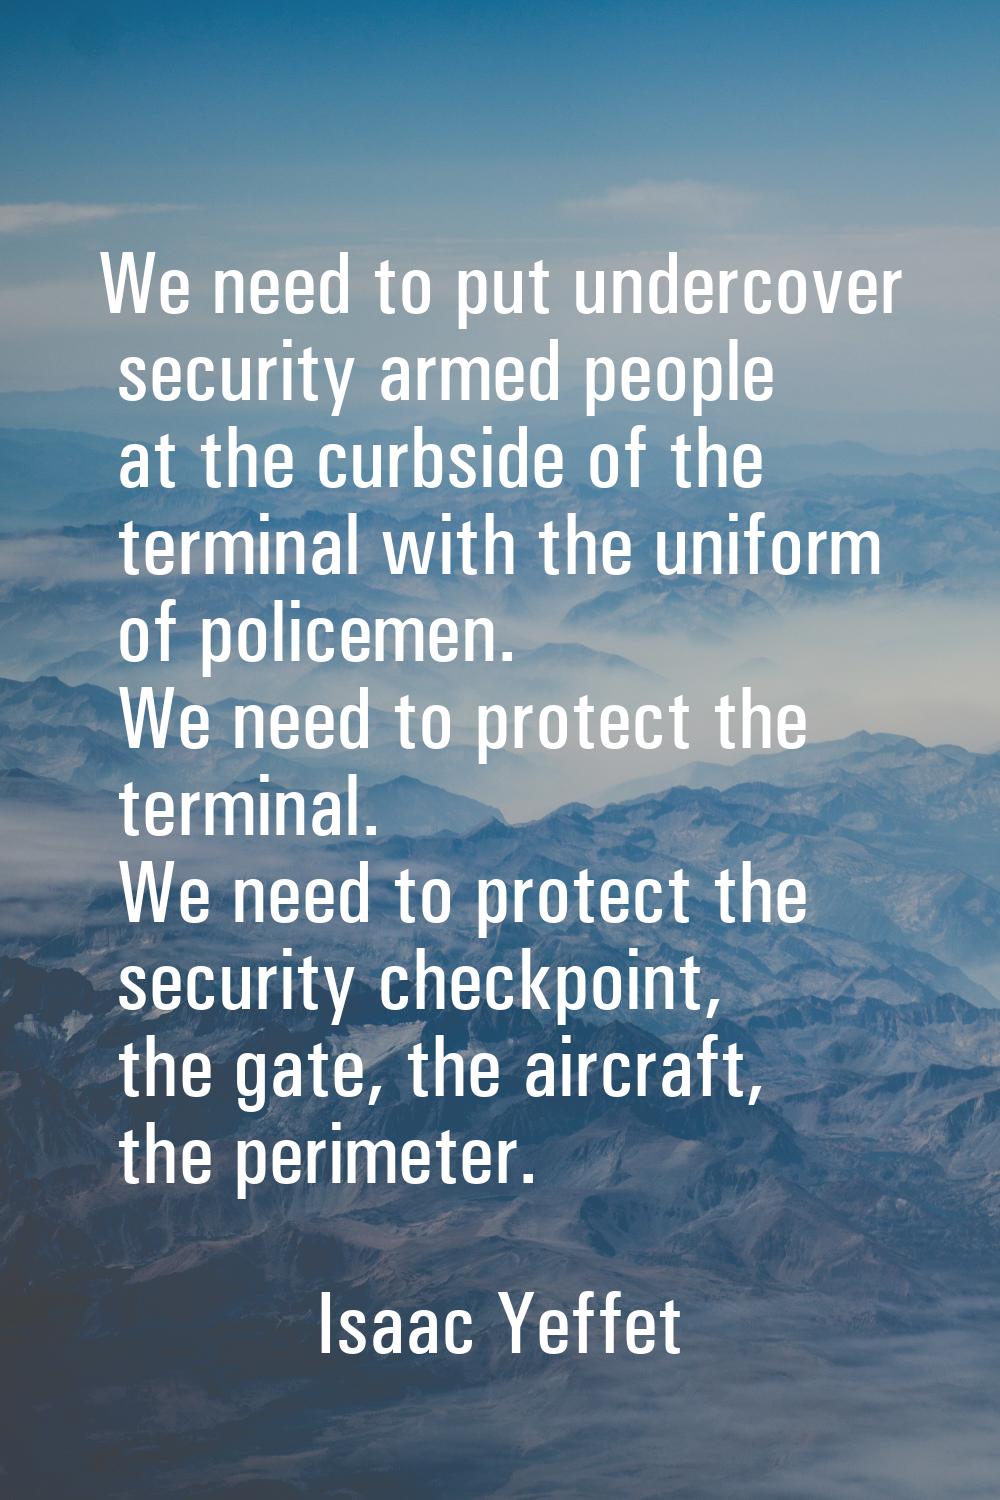 We need to put undercover security armed people at the curbside of the terminal with the uniform of